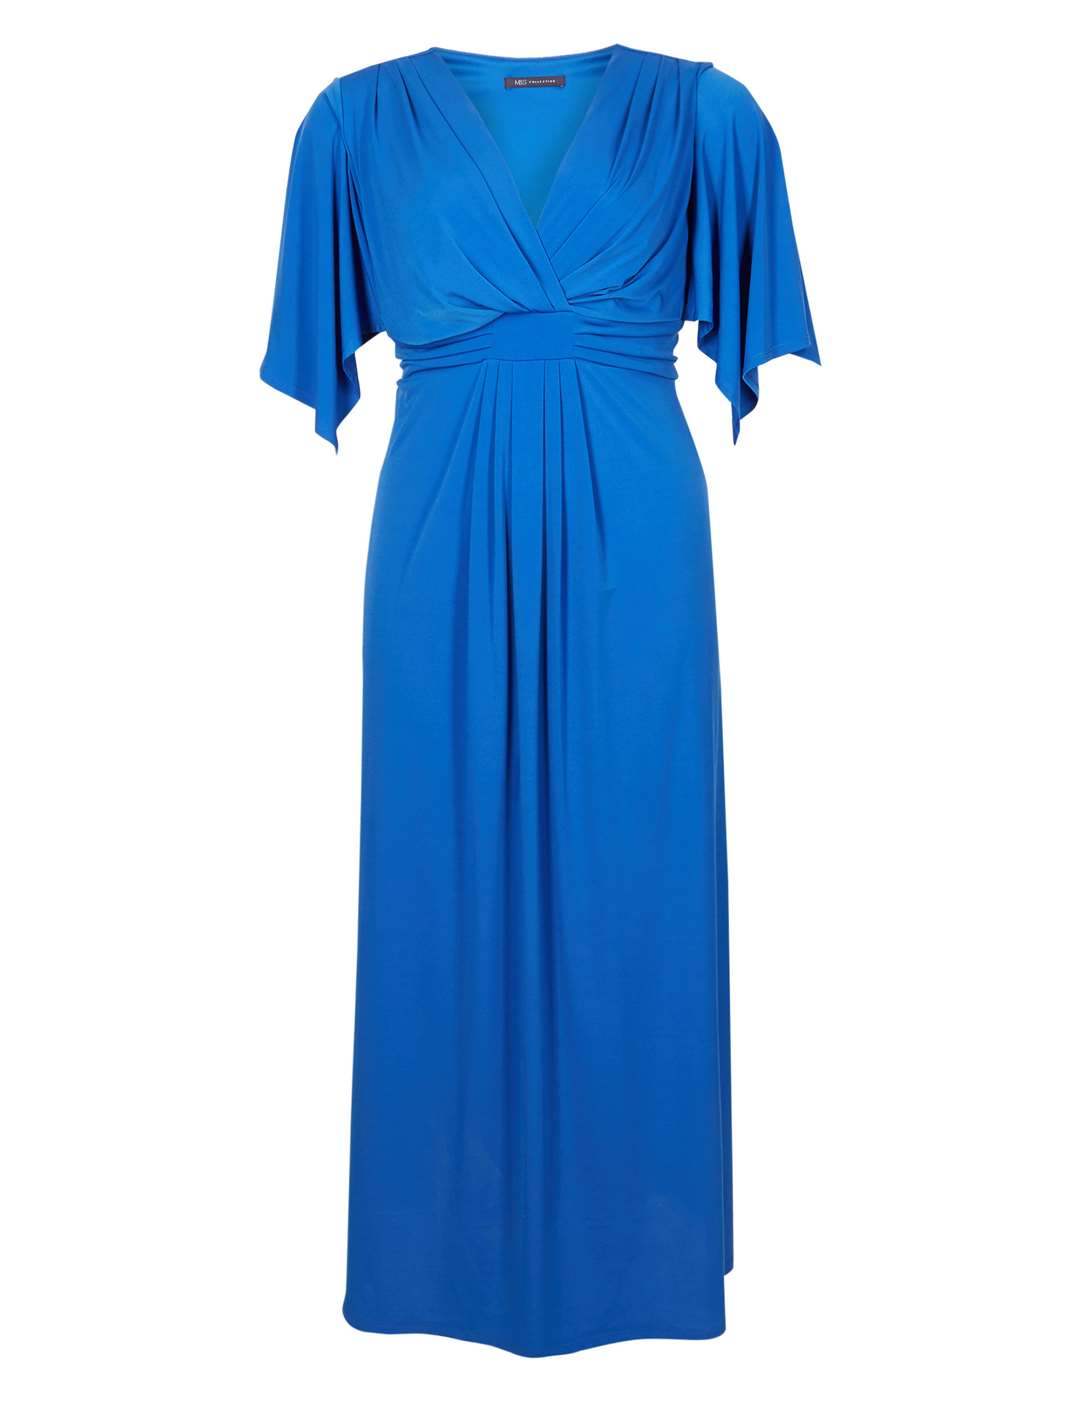 M&S Collection Curve dress, £65. Available January 23